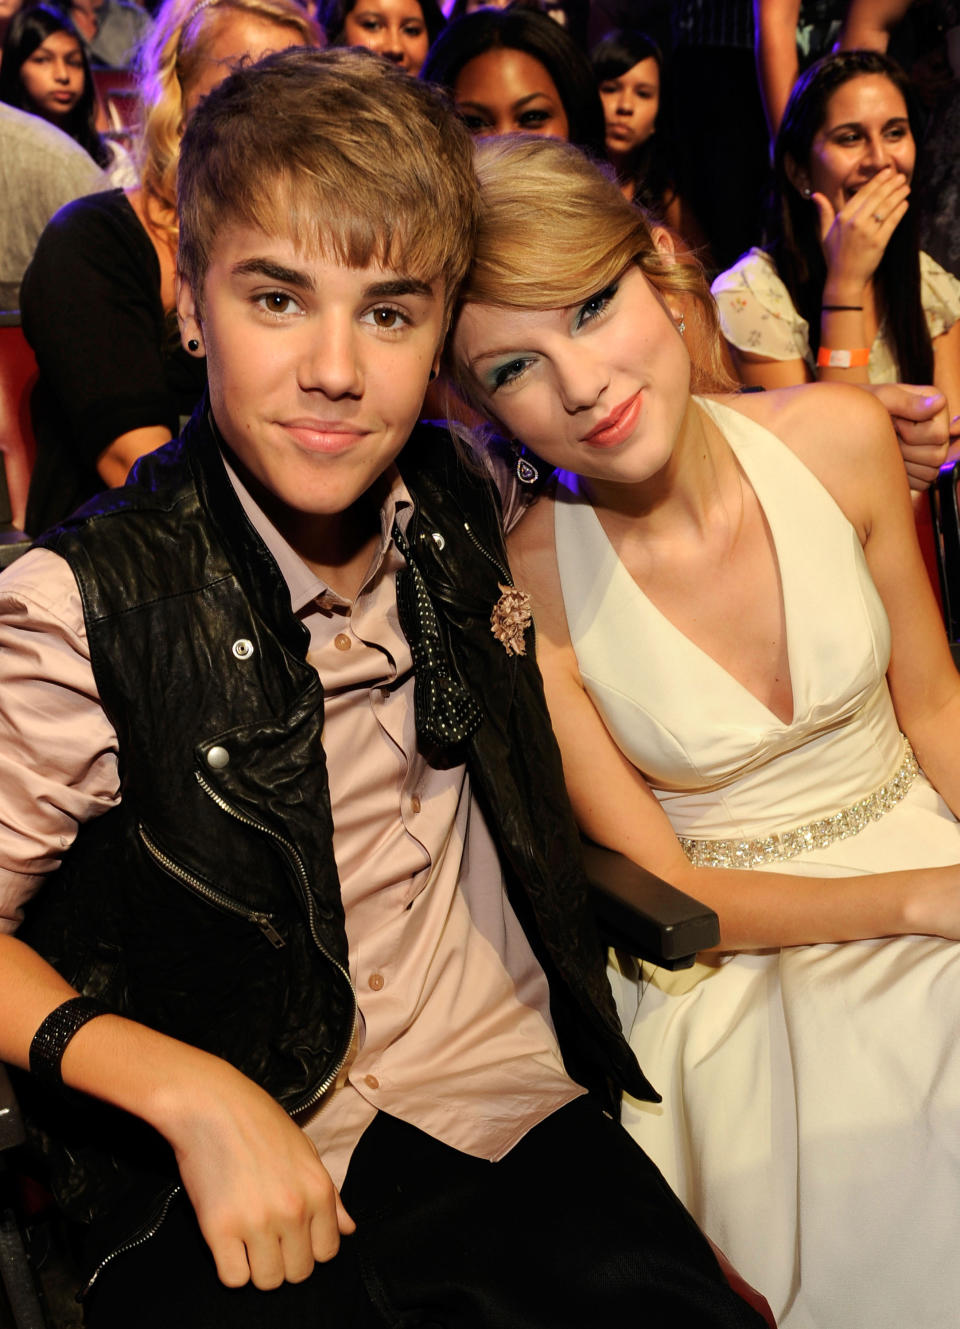 Justin Bieber and  Taylor Swift at the Teen Choice Awards in 2011. (Getty Images)